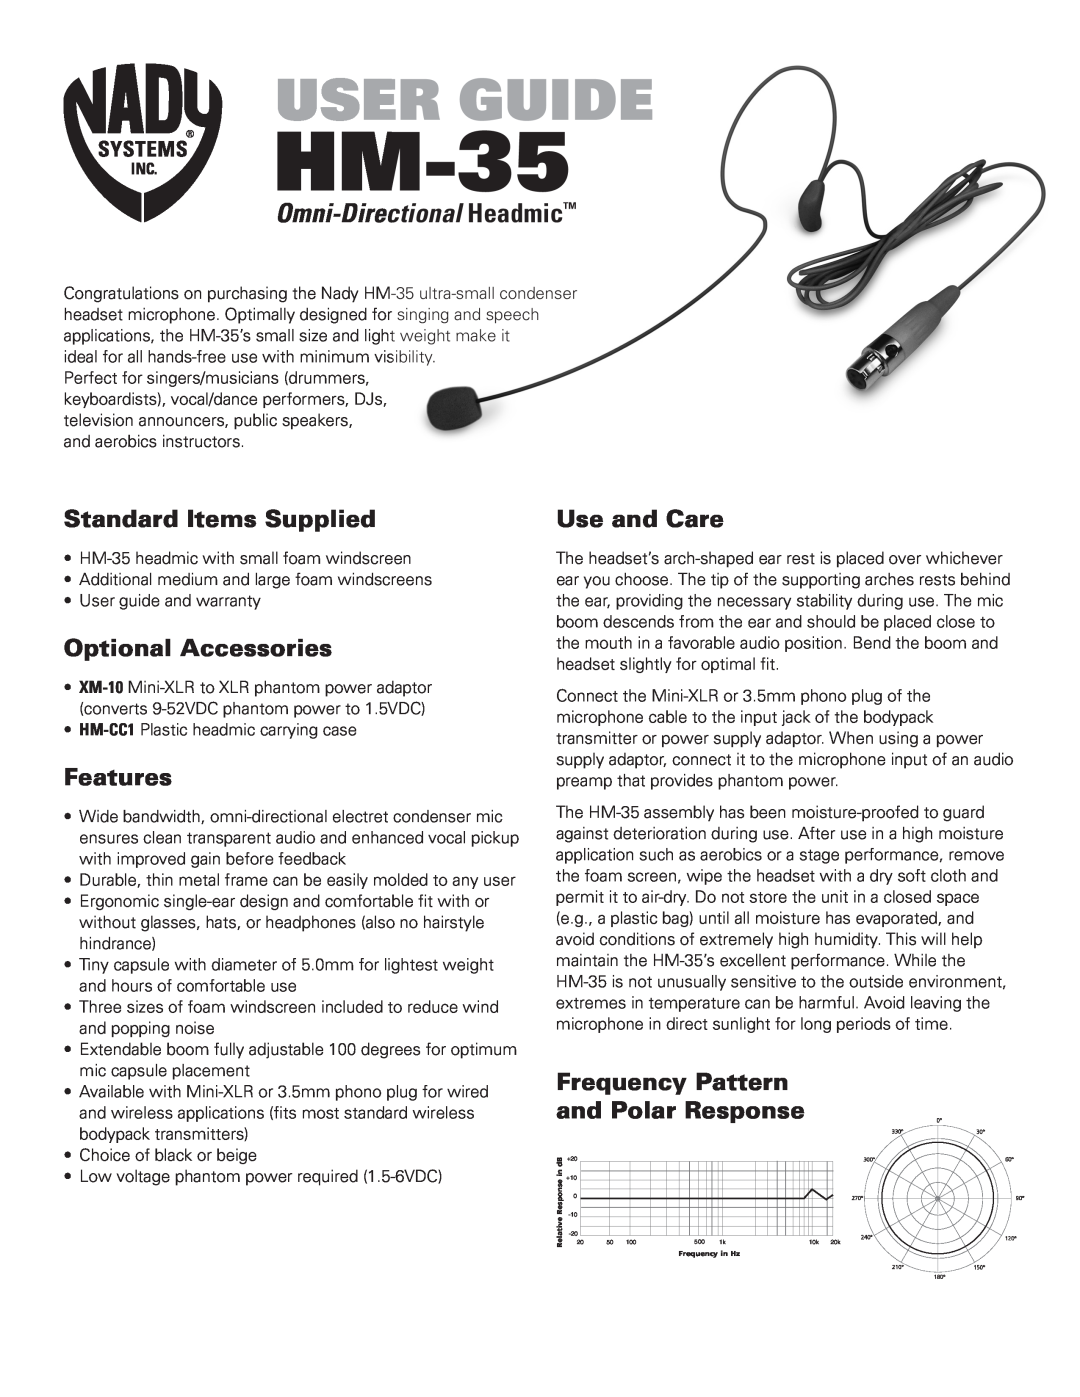 Nady Systems HM-35 warranty Standard Items Supplied, Optional Accessories, Features, Use and Care, User Guide 